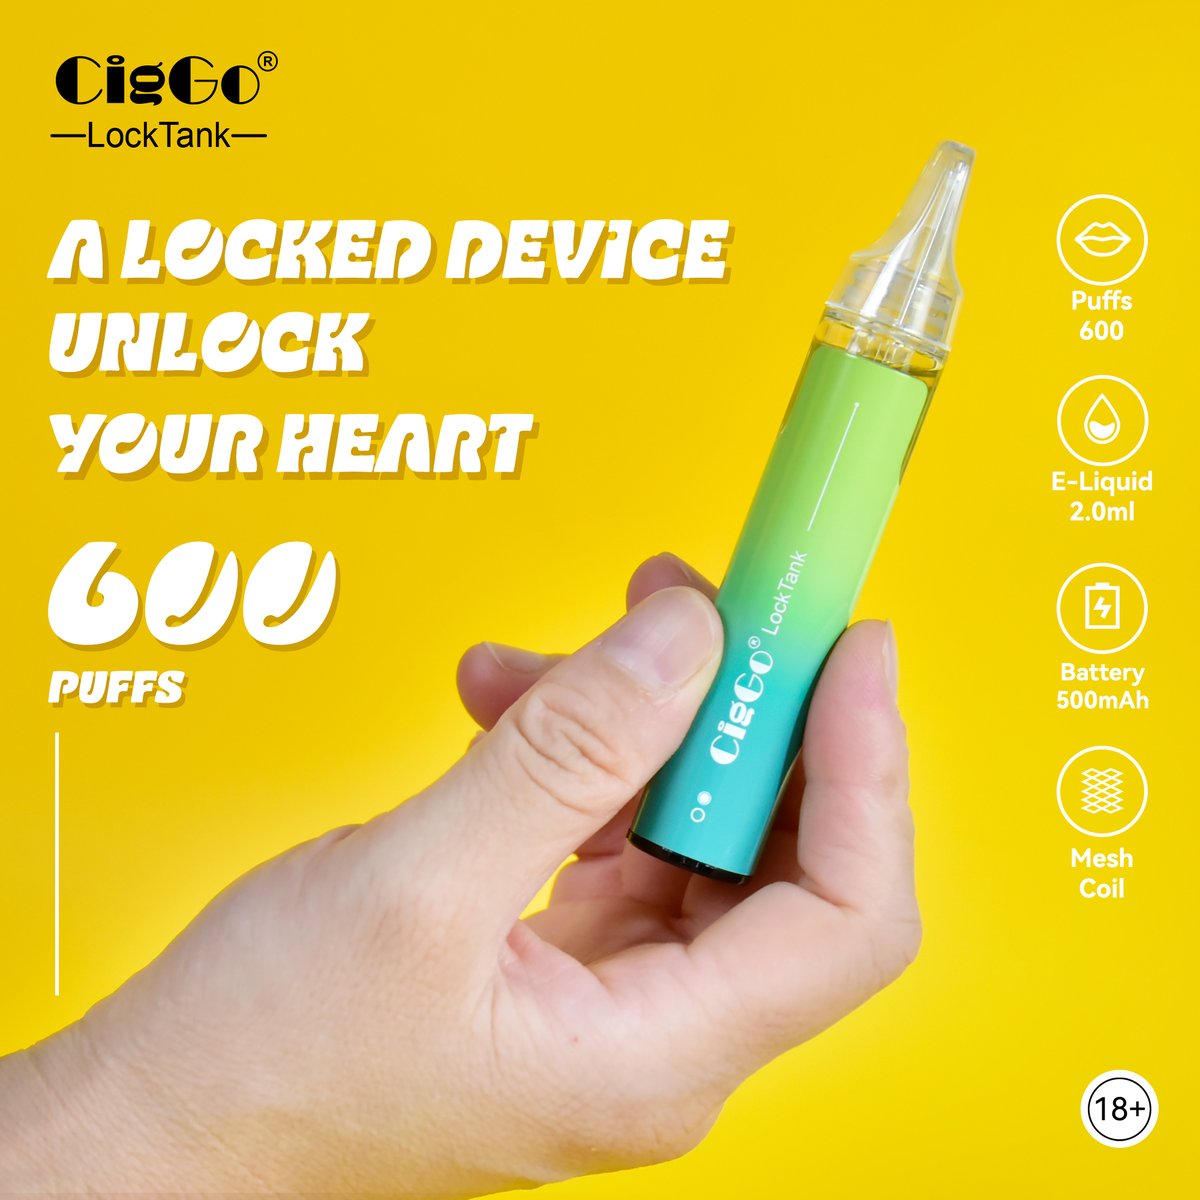 SEE IT, VAPE IT. Flavor Concentrated in Lock!

No Oil-Storage-Cotton Pod, Purest Taste; 2ml Accurate Eliquid Capacity, no headache of overfilling.

CigGo LockTank has an ejuice locking system. #newtech You can lock it when not in use, get rid of leaking problem in your pocket